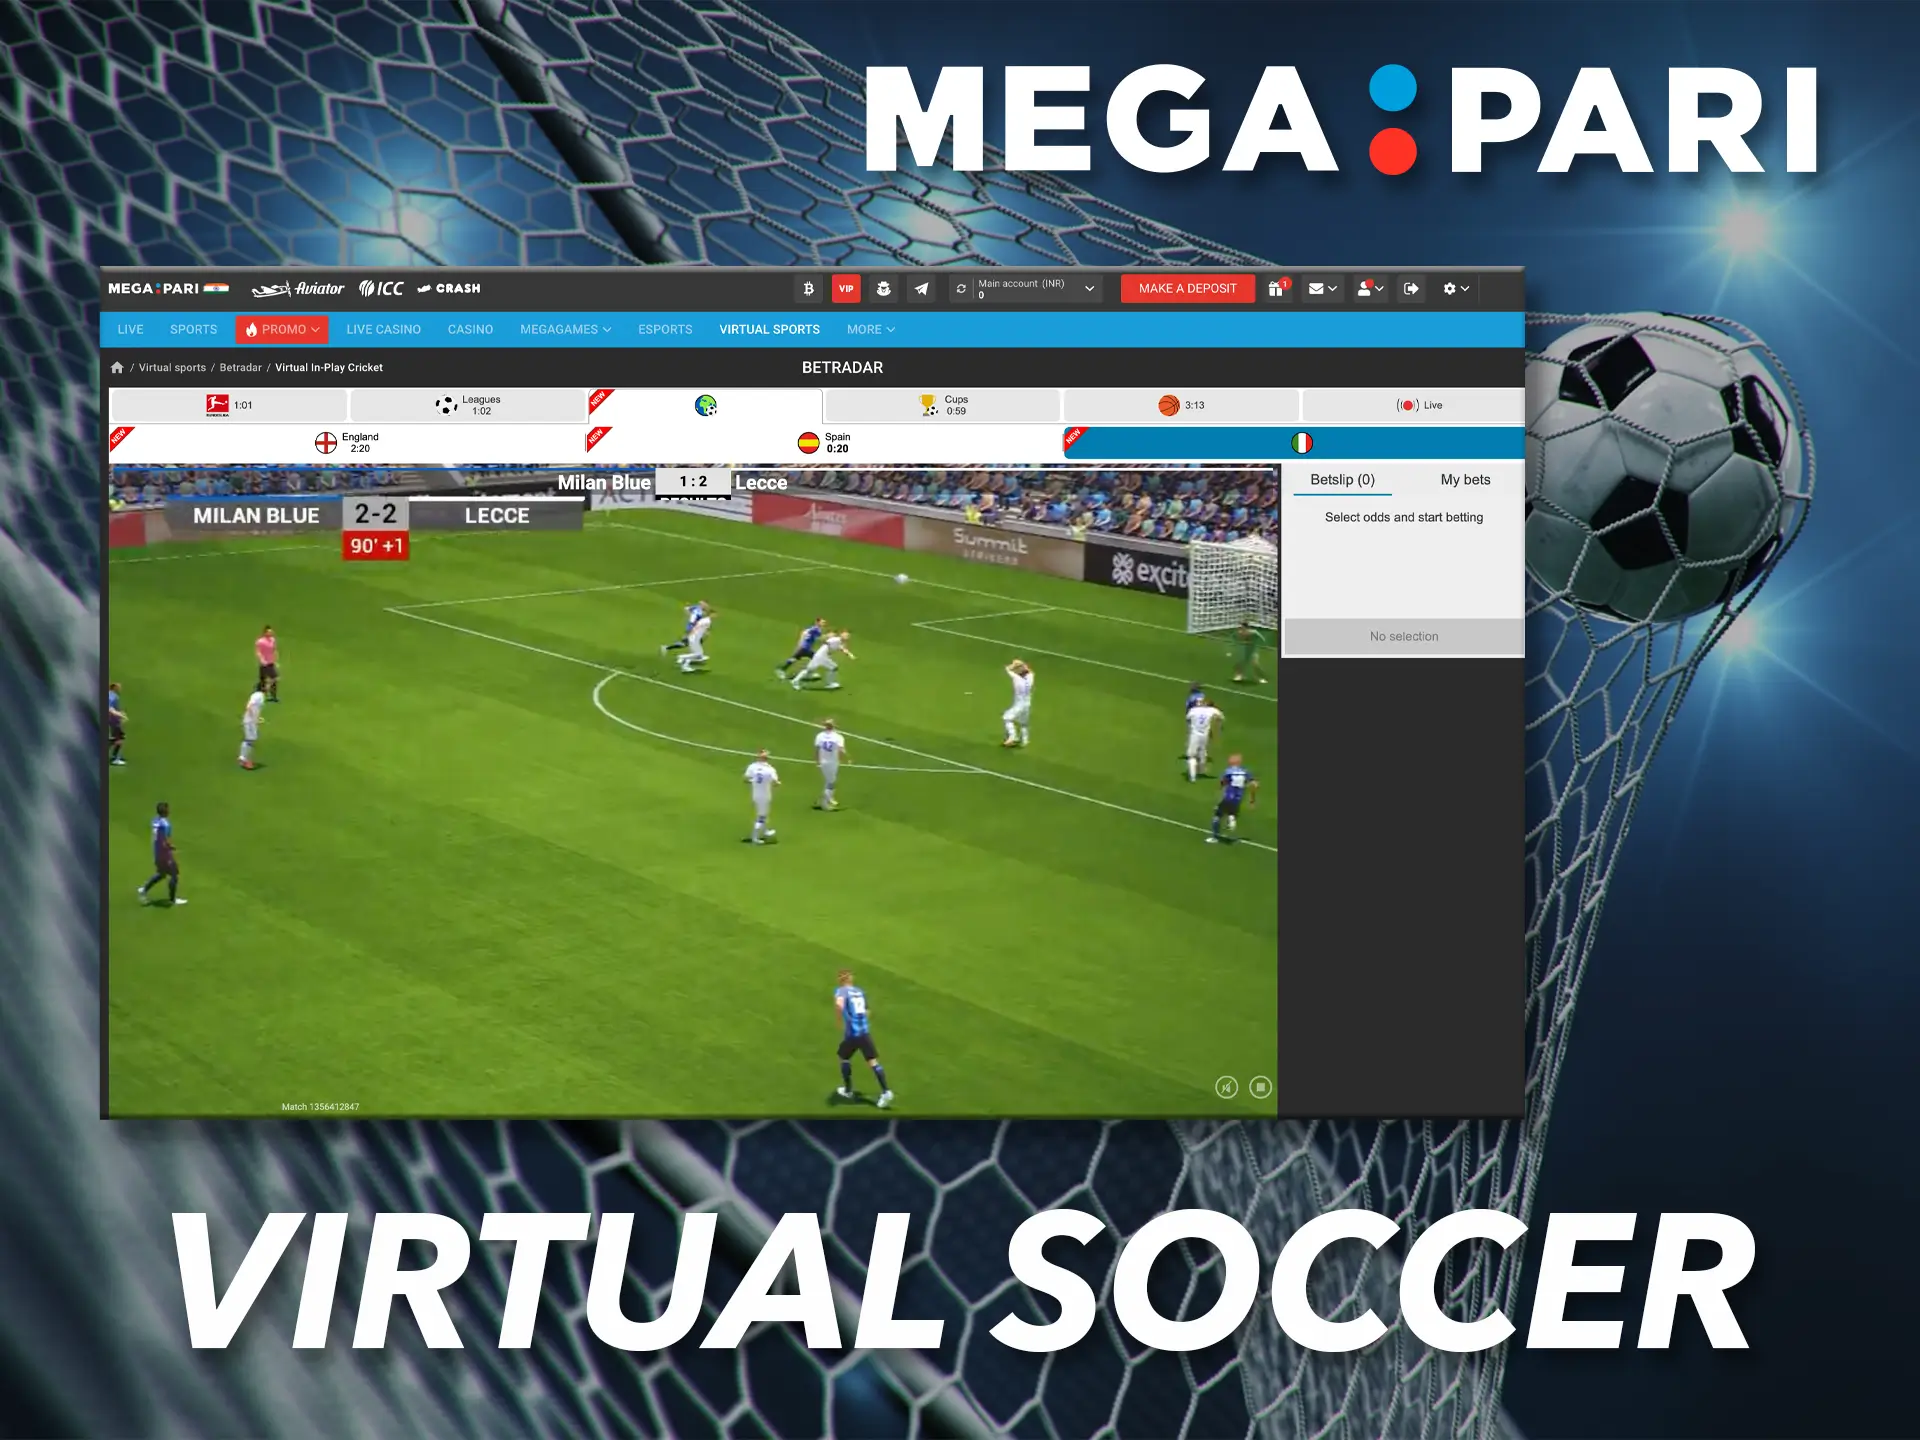 Watch virtual soccer and place your bets.